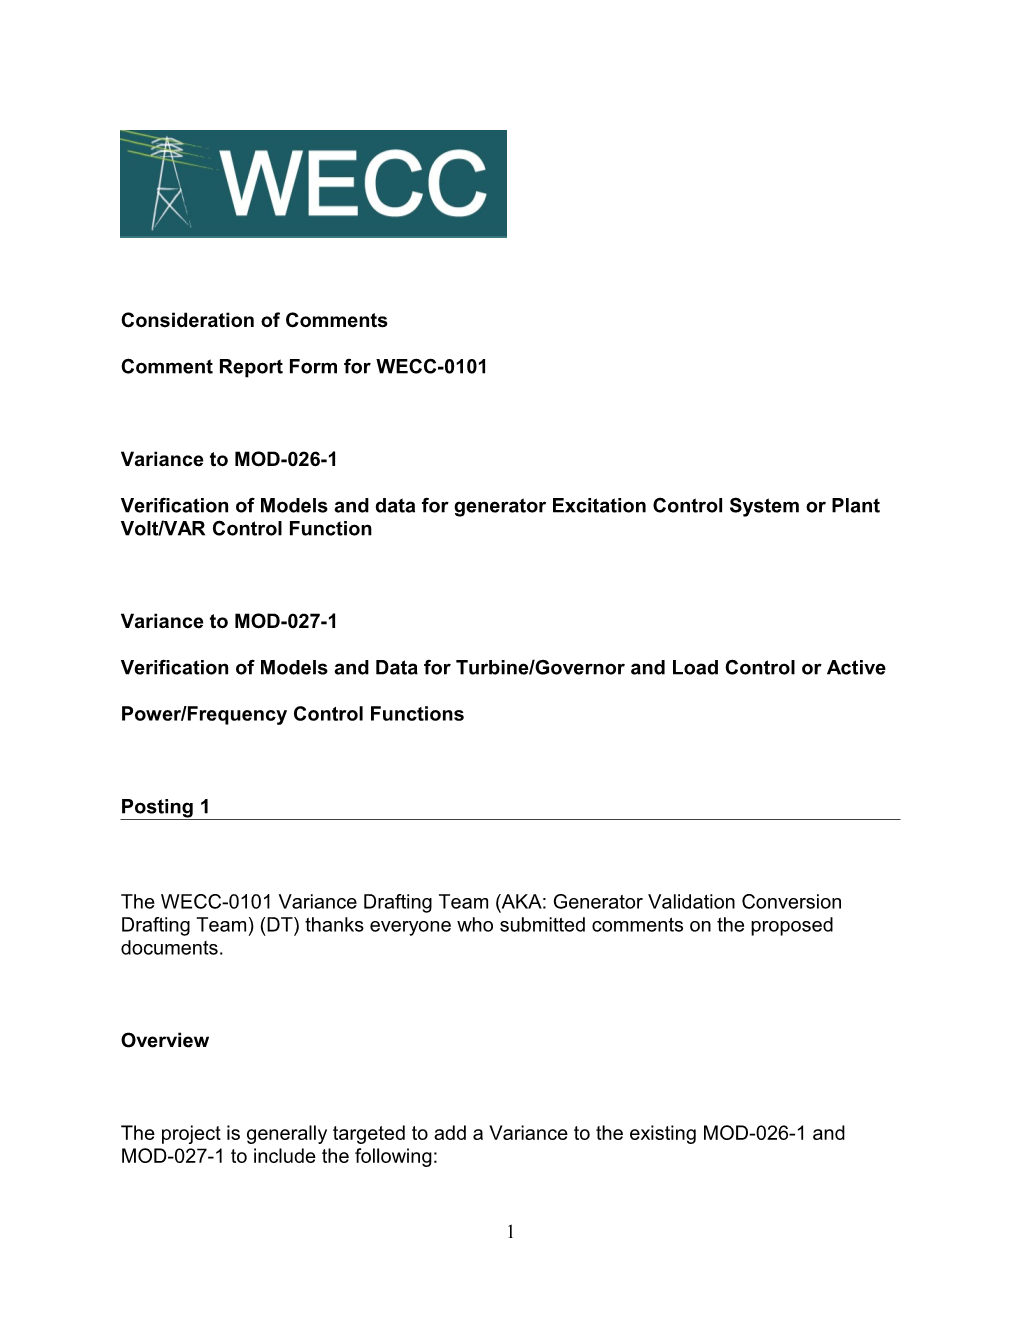 WECC-0101 Posting 1 Generator Validation Conversion Response to Comments - 5-6-2014